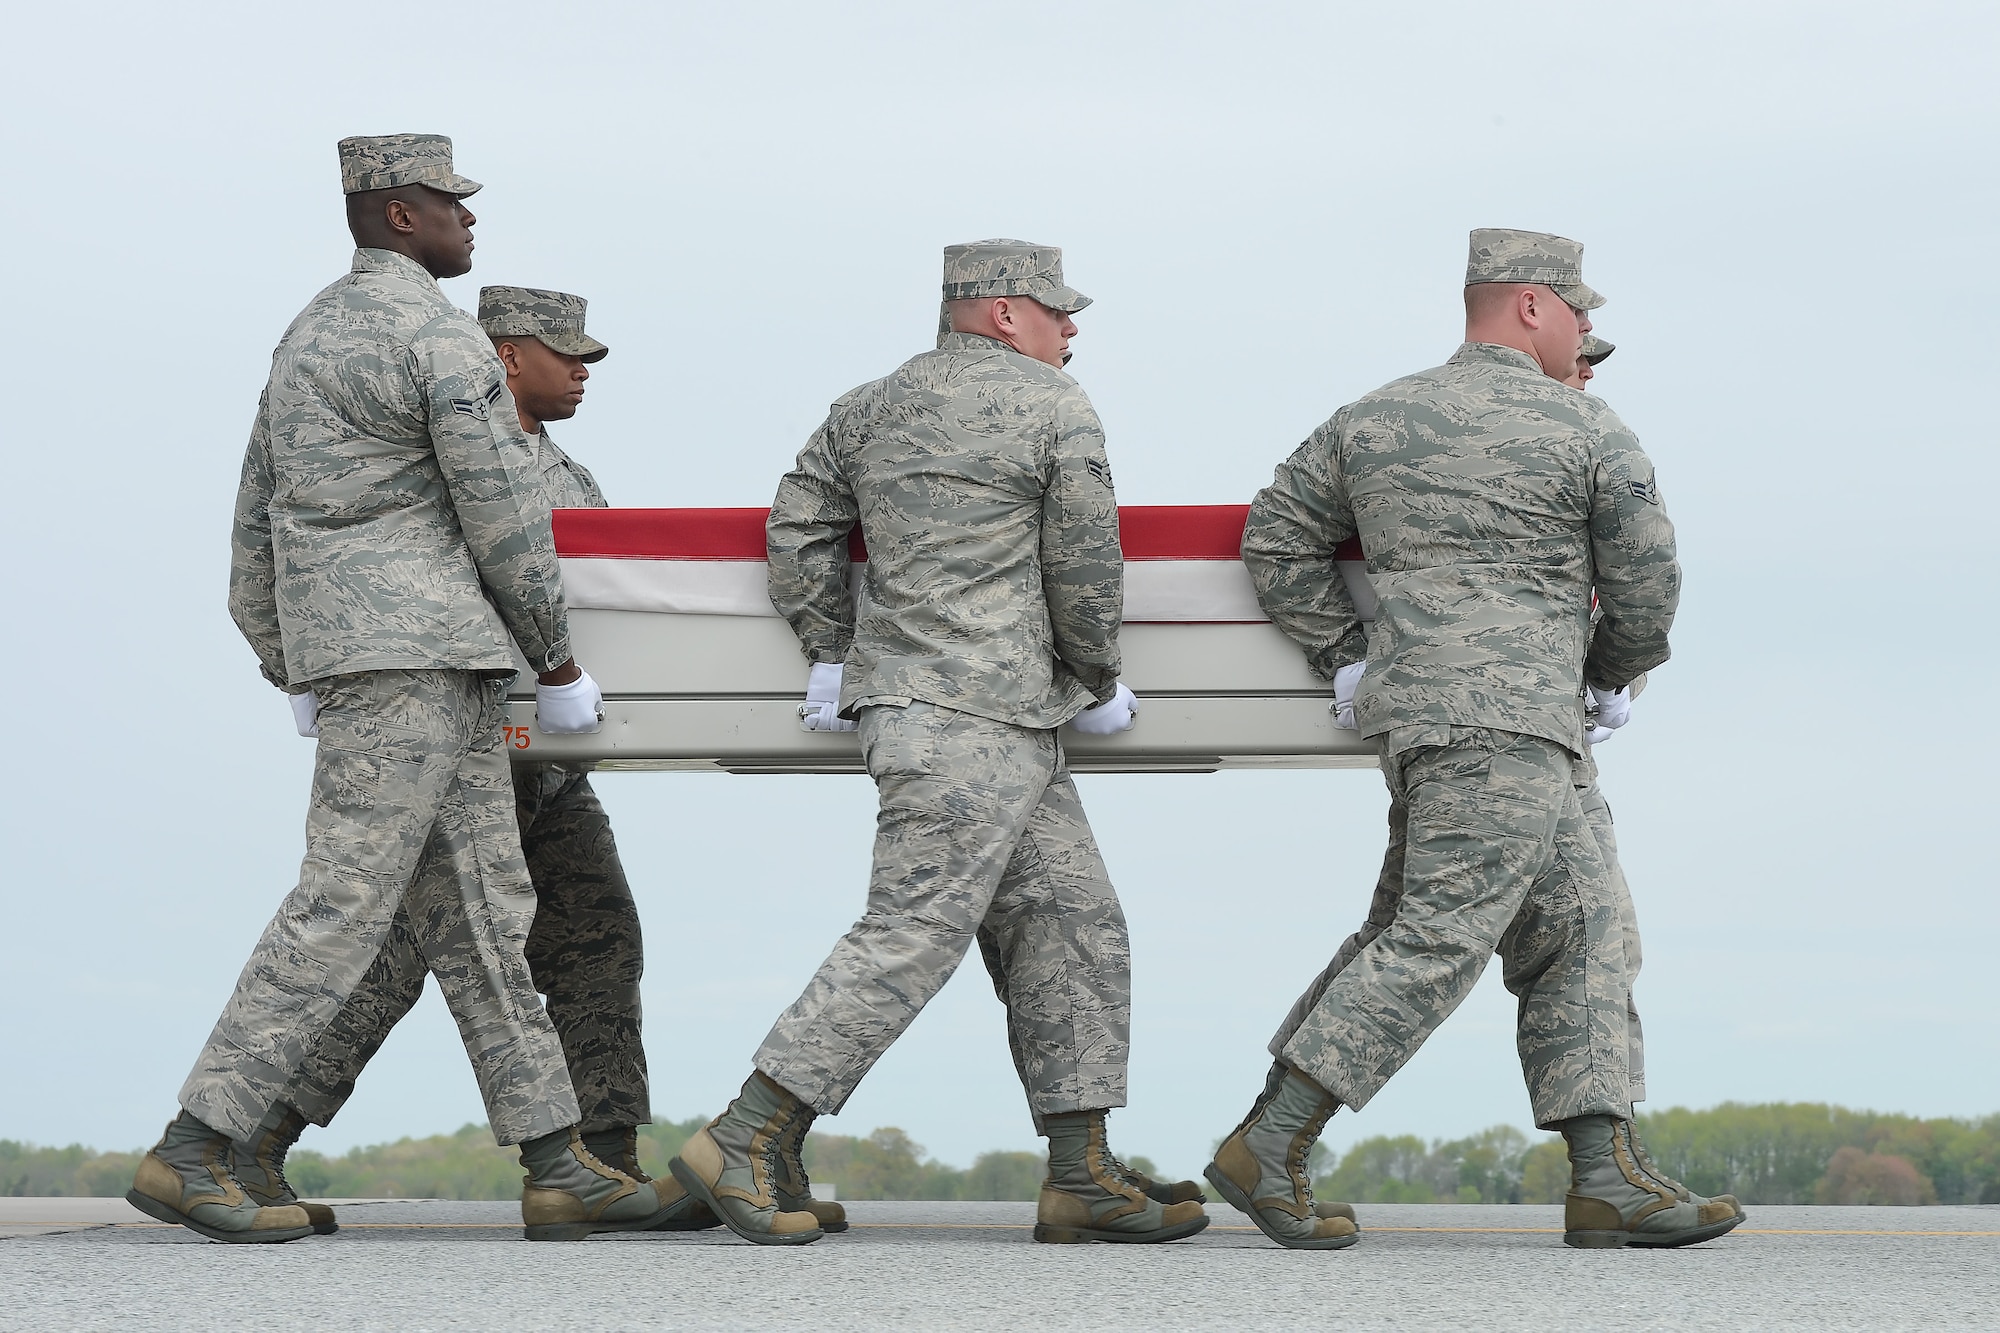 A U.S. Air Force carry team transfers the remains of Staff Sgt. Daniel N. Fannin, of Morehead, Ky., during a dignified transfer April 30, 2013 at Dover Air Force Base, Del. Fannin was assigned to the 552nd Operations Support Squadron, Tinker AFB, Okla. (U.S. Air Force photo/Greg L. Davis)